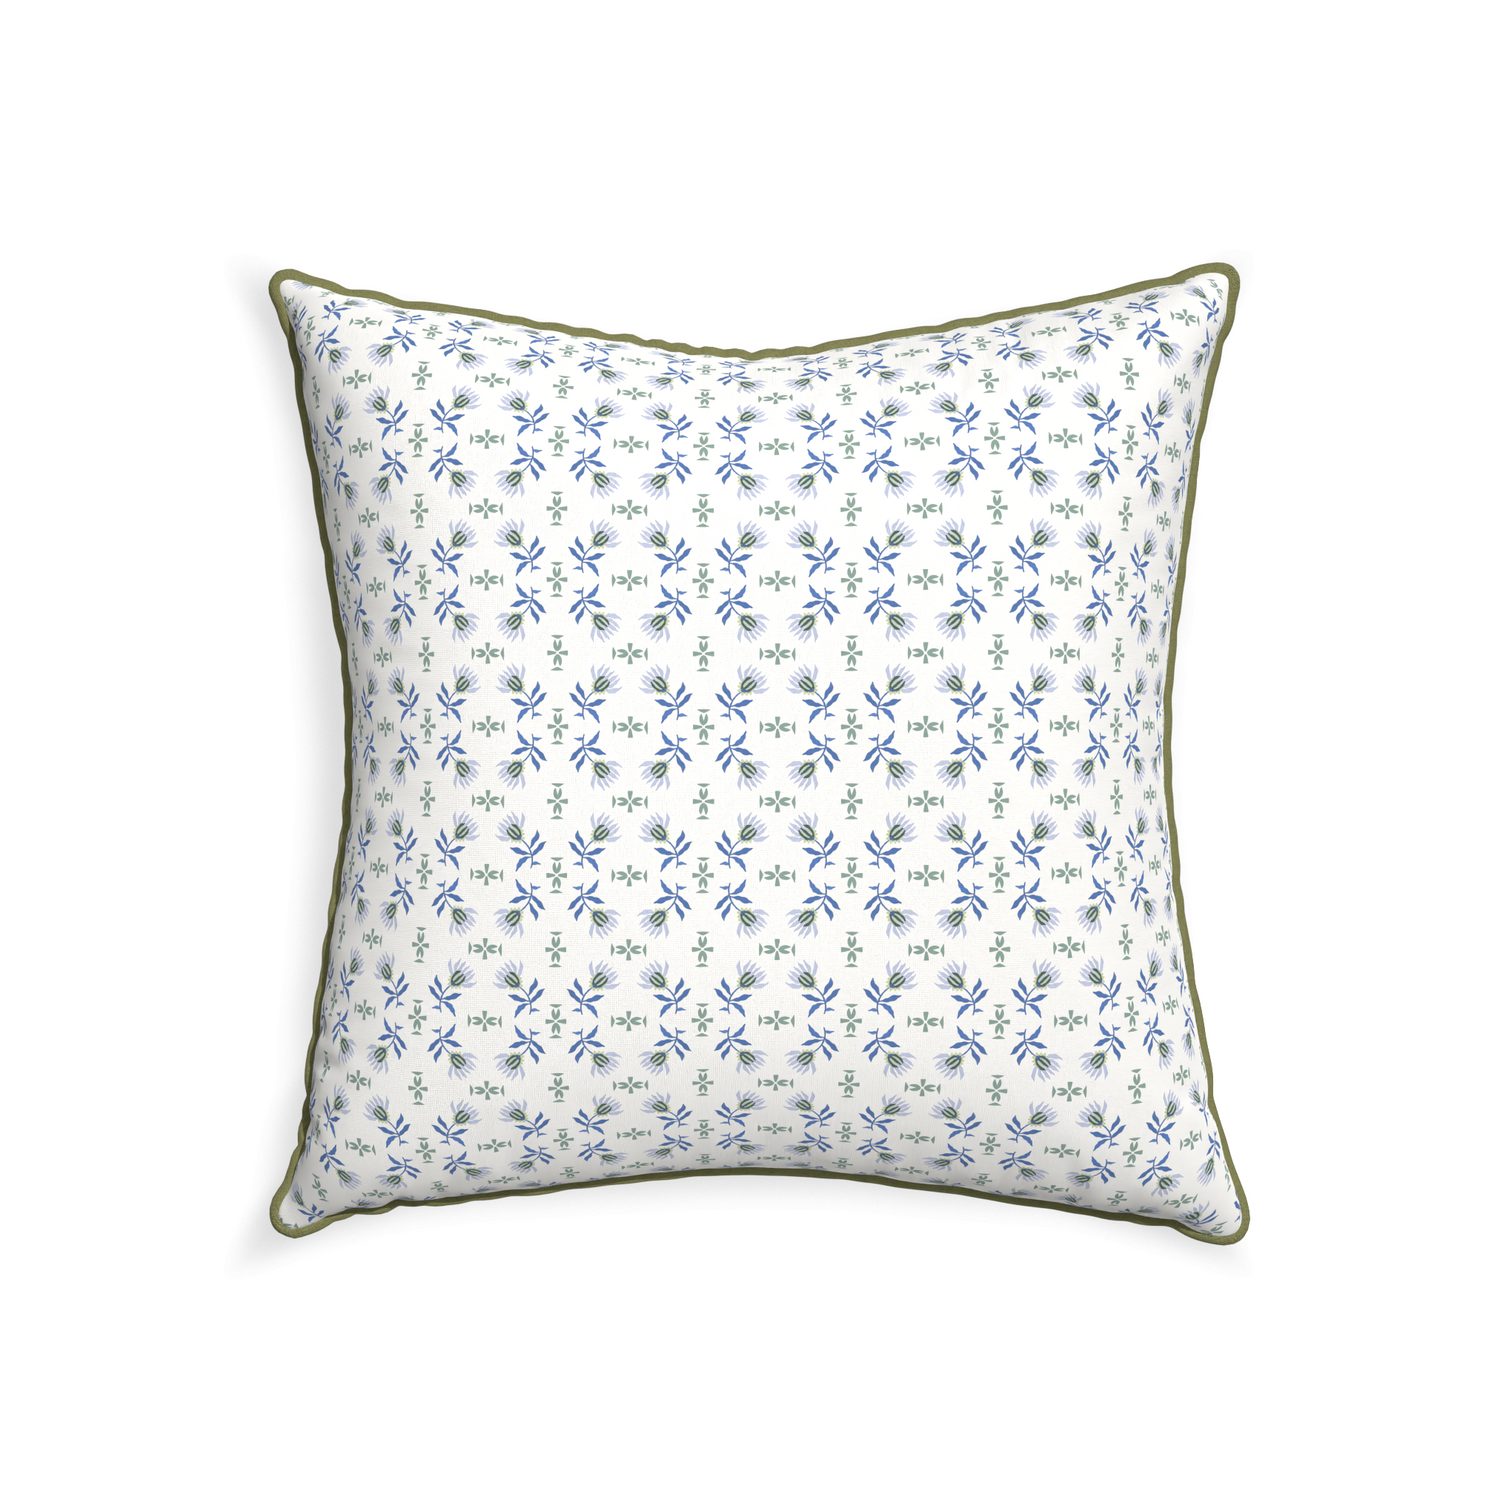 square blue and green floral pillow with moss green piping